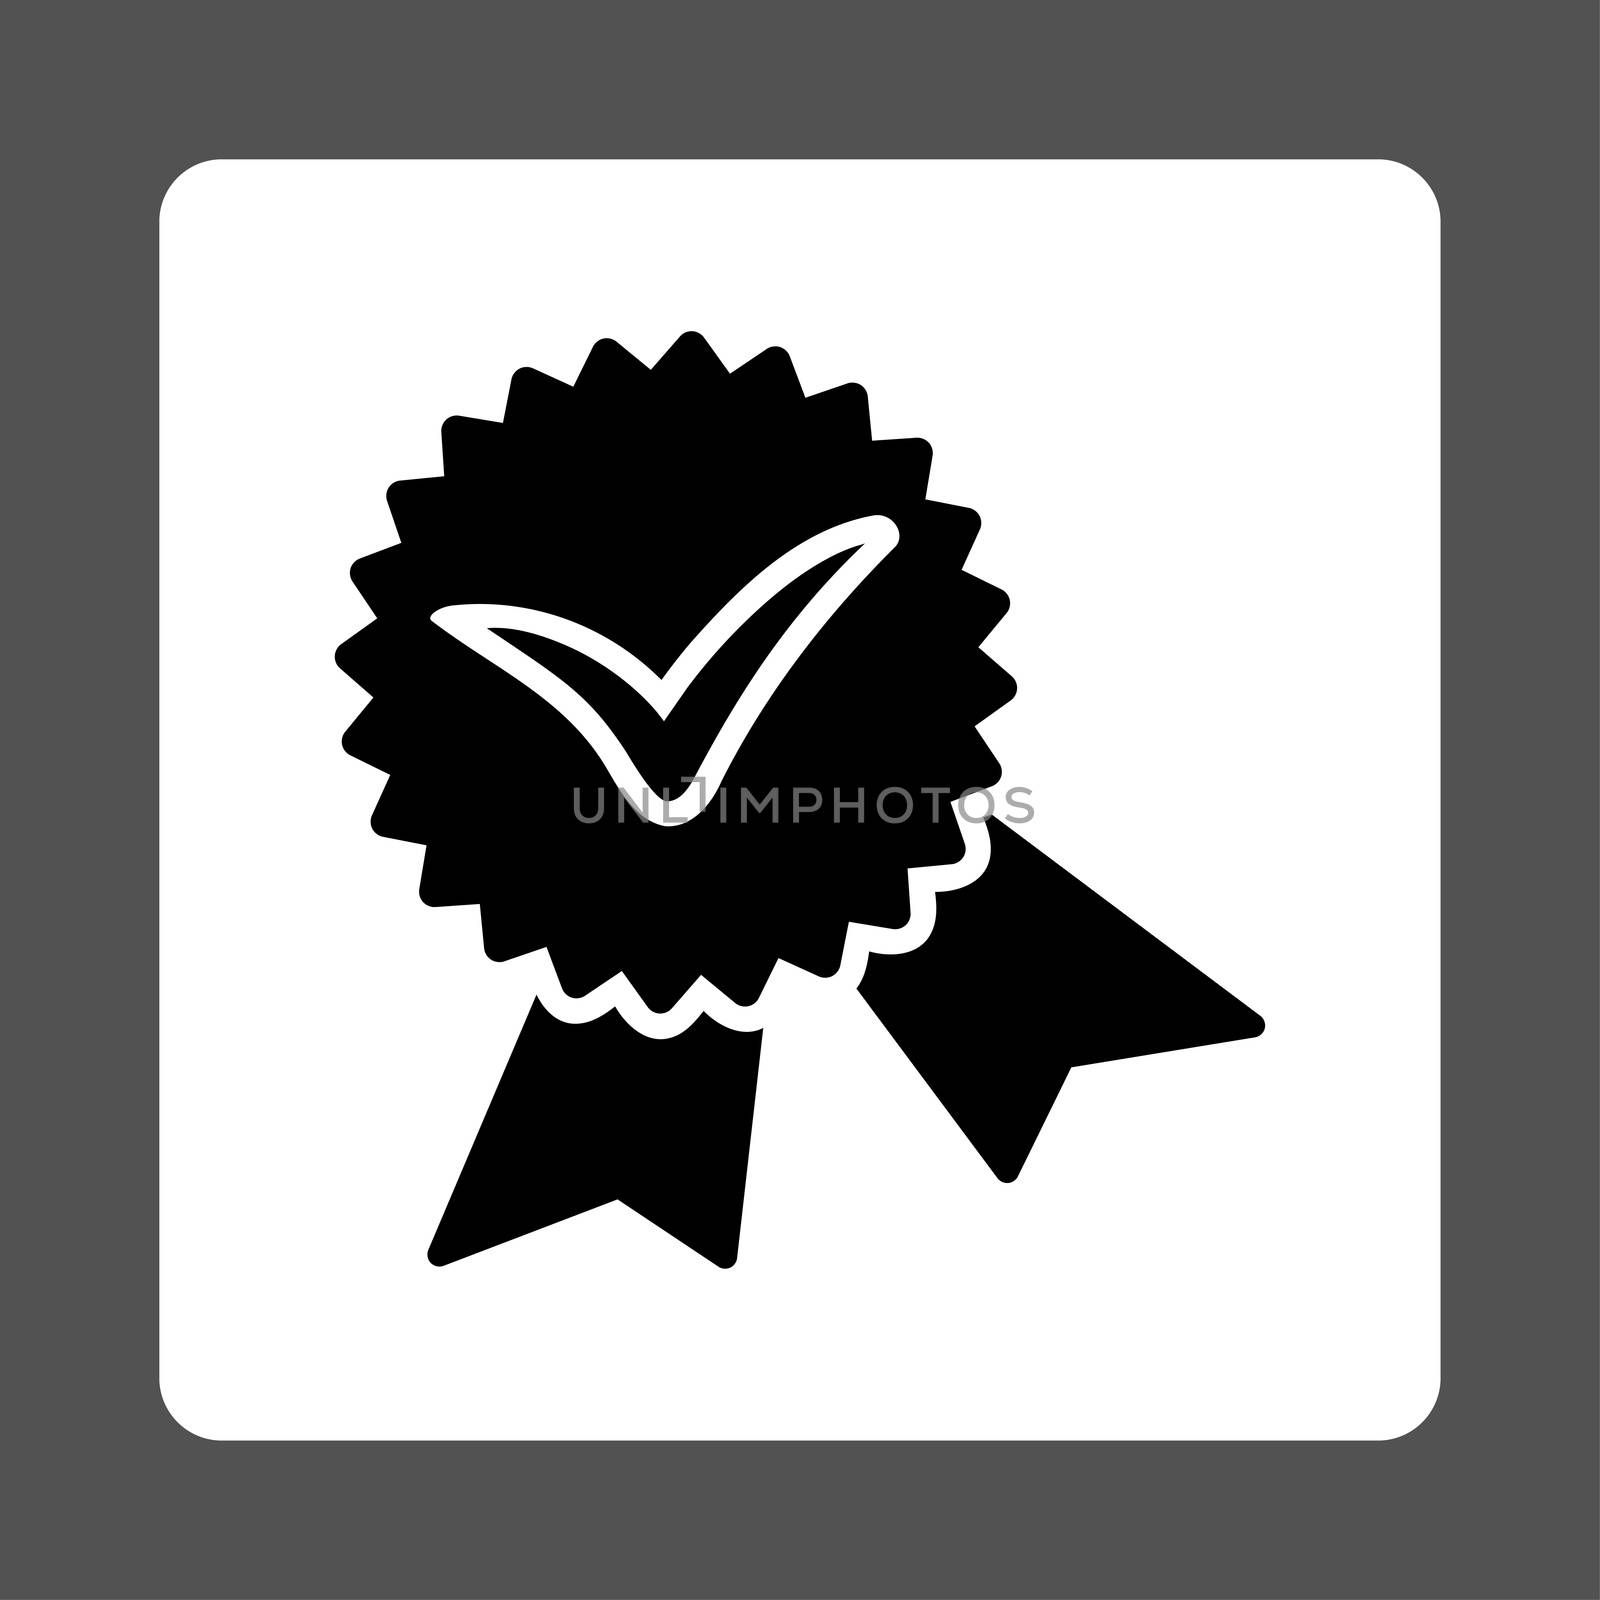 Validation seal icon from Award Buttons OverColor Set. Icon style is black and white colors, flat rounded square button, gray background.